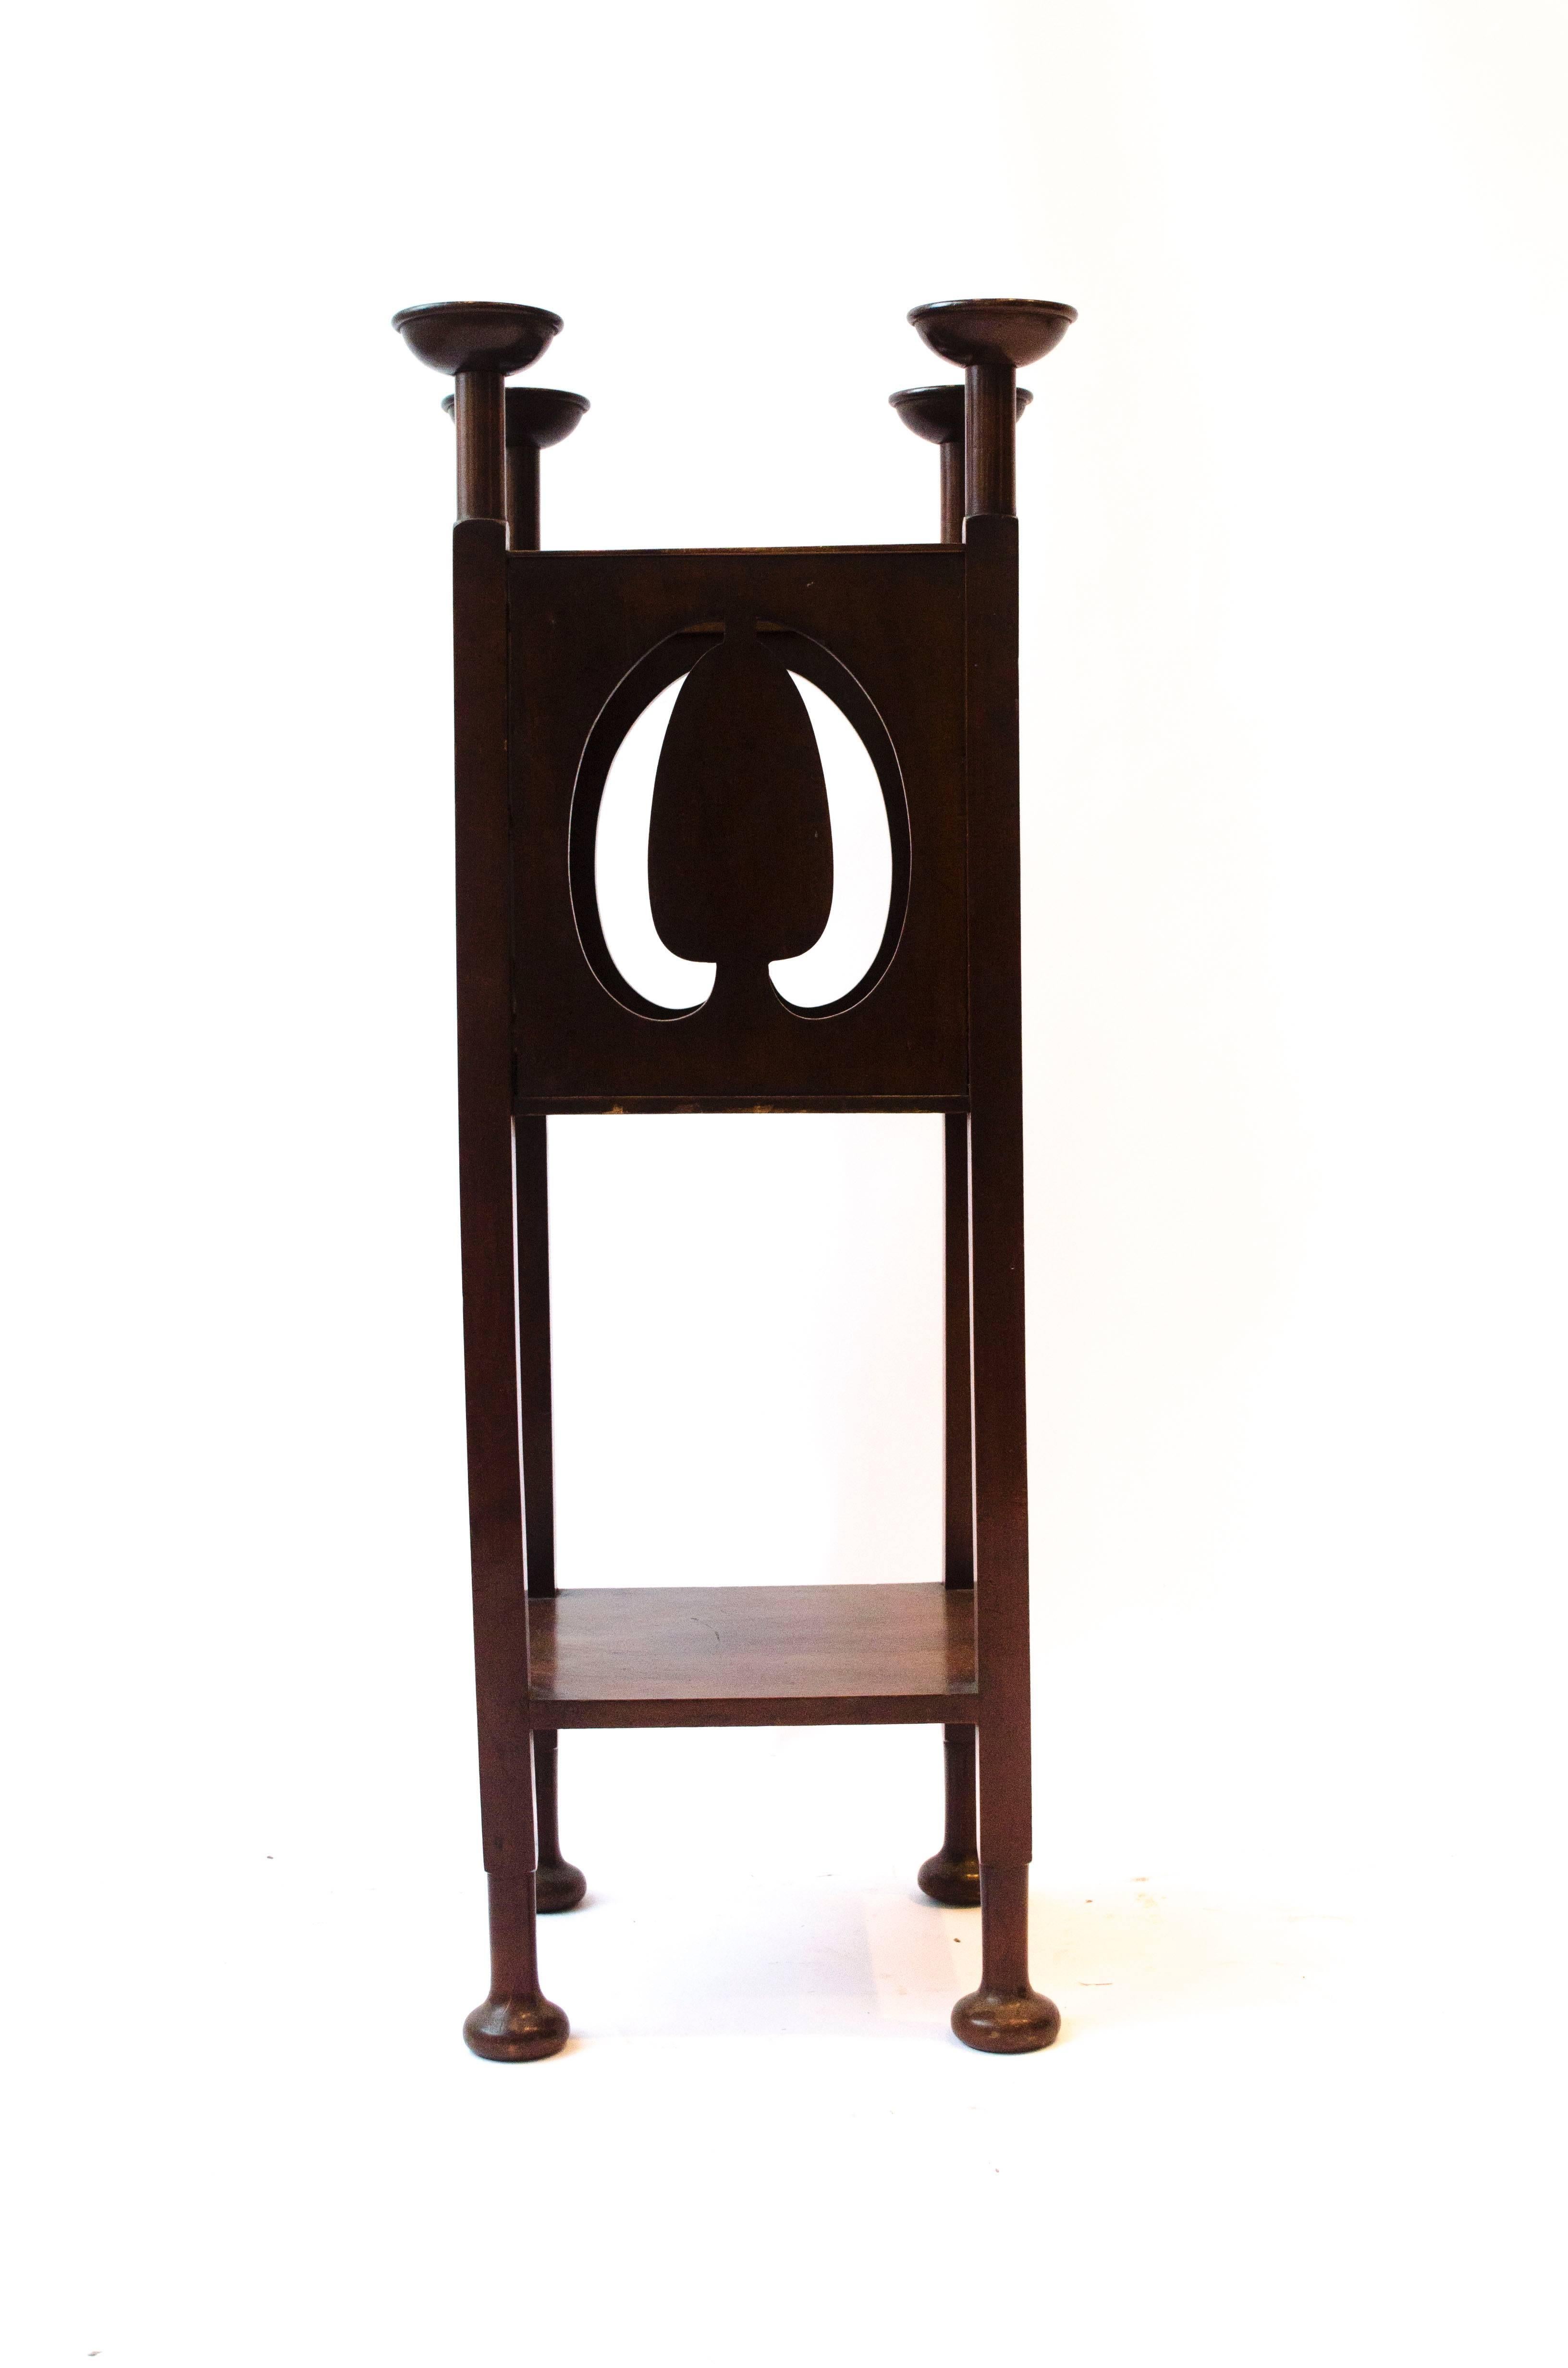 William James Neatby (attributed).
An Arts and Crafts Glasgow Style mahogany plant stand, with elongated uprights, circular caps and stylized floral piercing to all four sides.